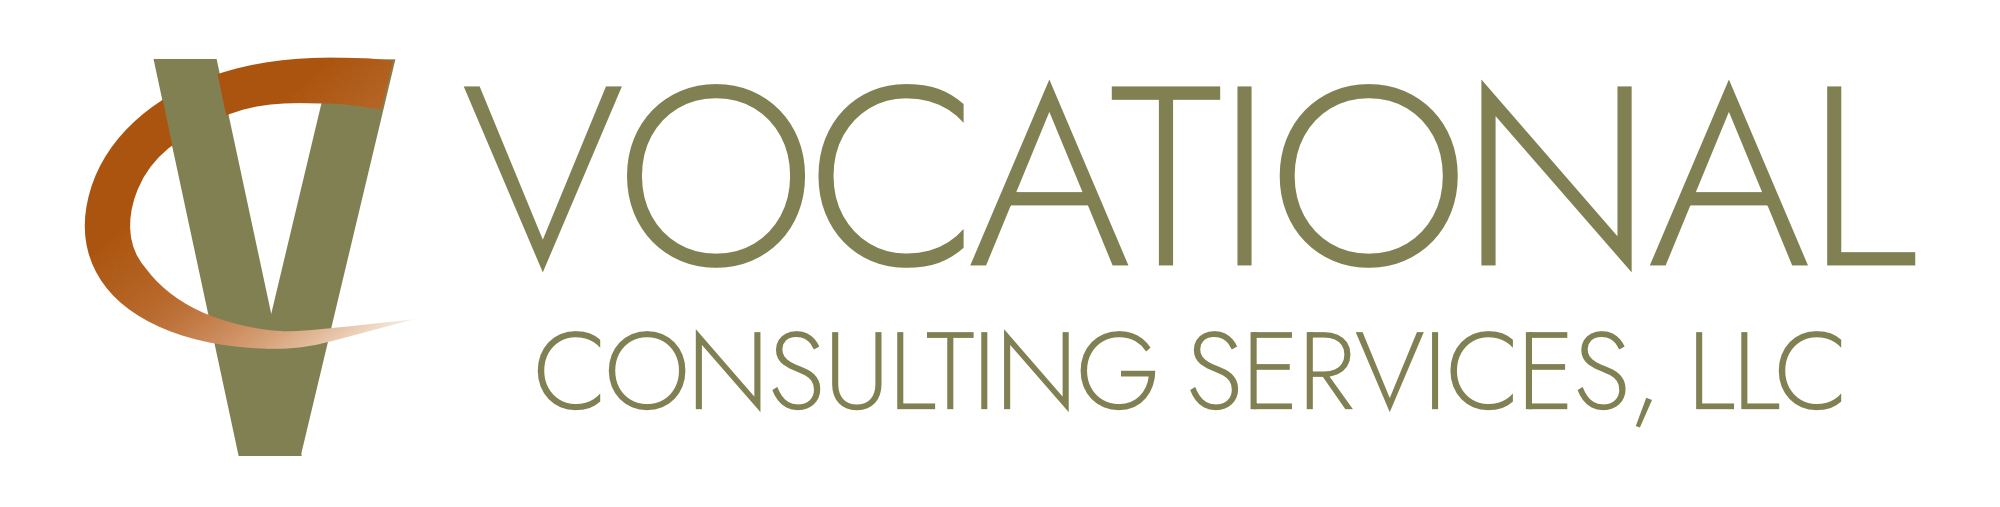 Vocational Consulting Service located at 1537 Park Place Suite 500 Green Bay, WI 54304